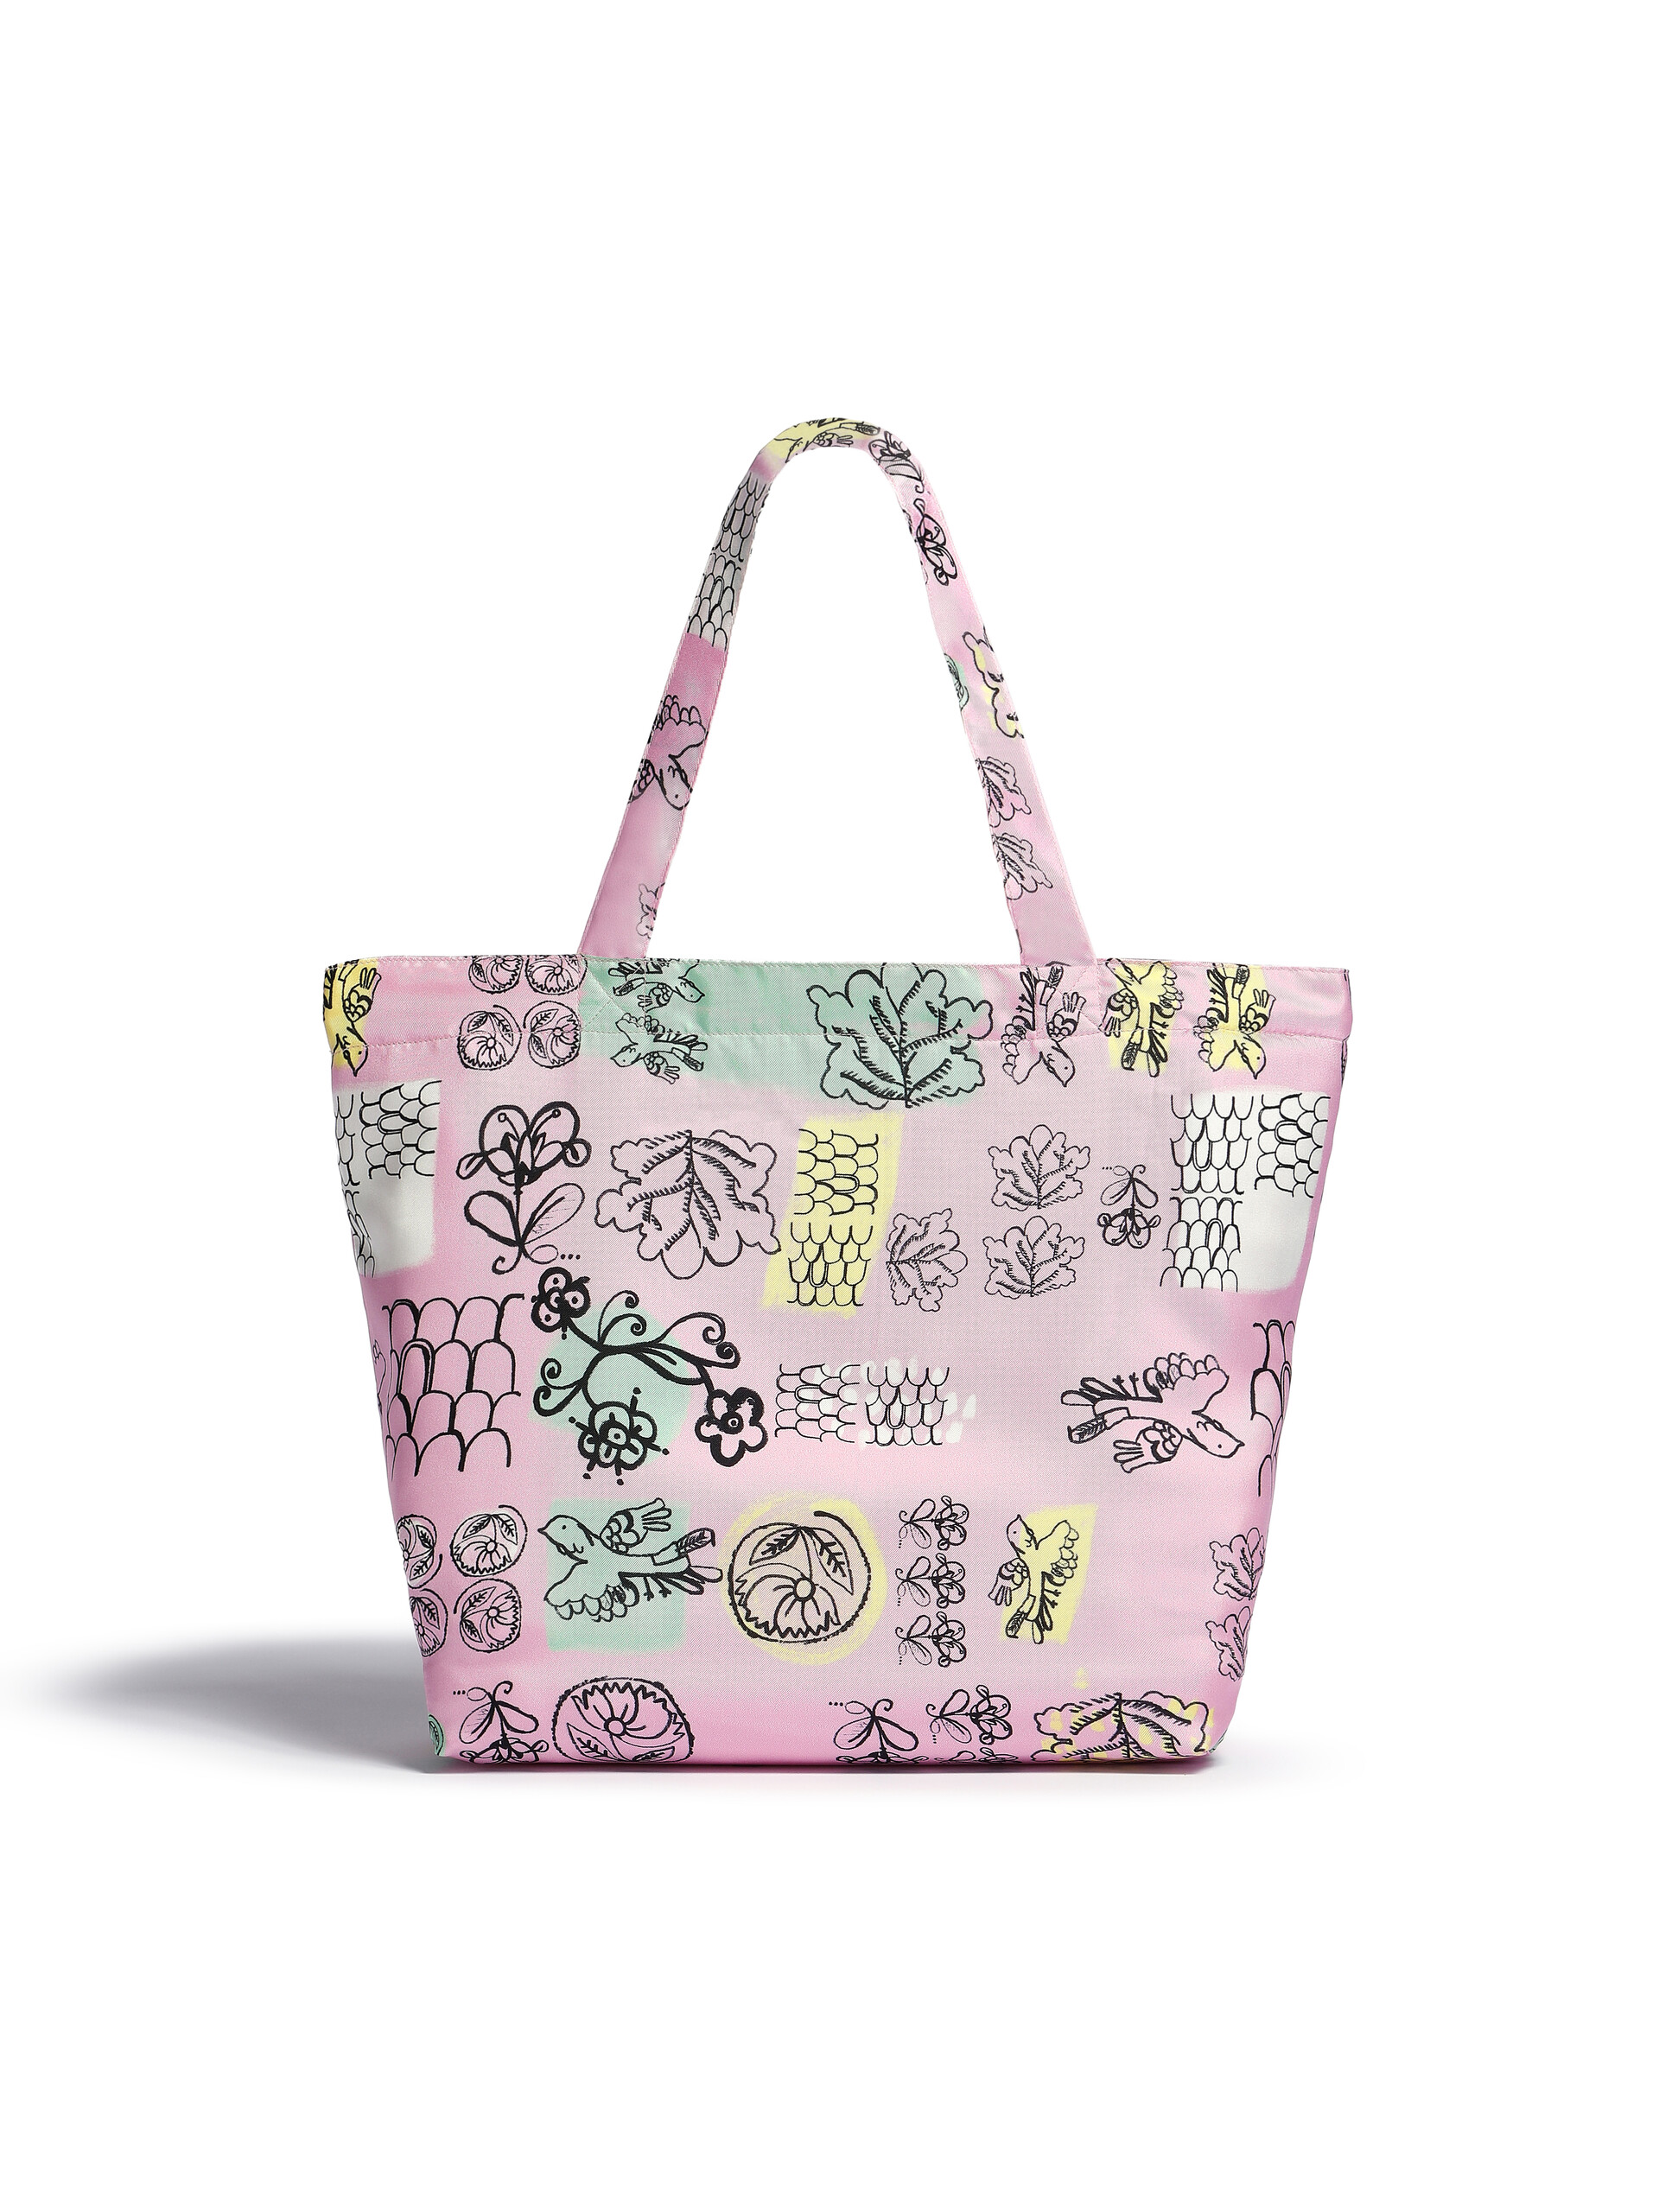 Pink and blue silk tote bag with archival graphic print - Bags - Image 3